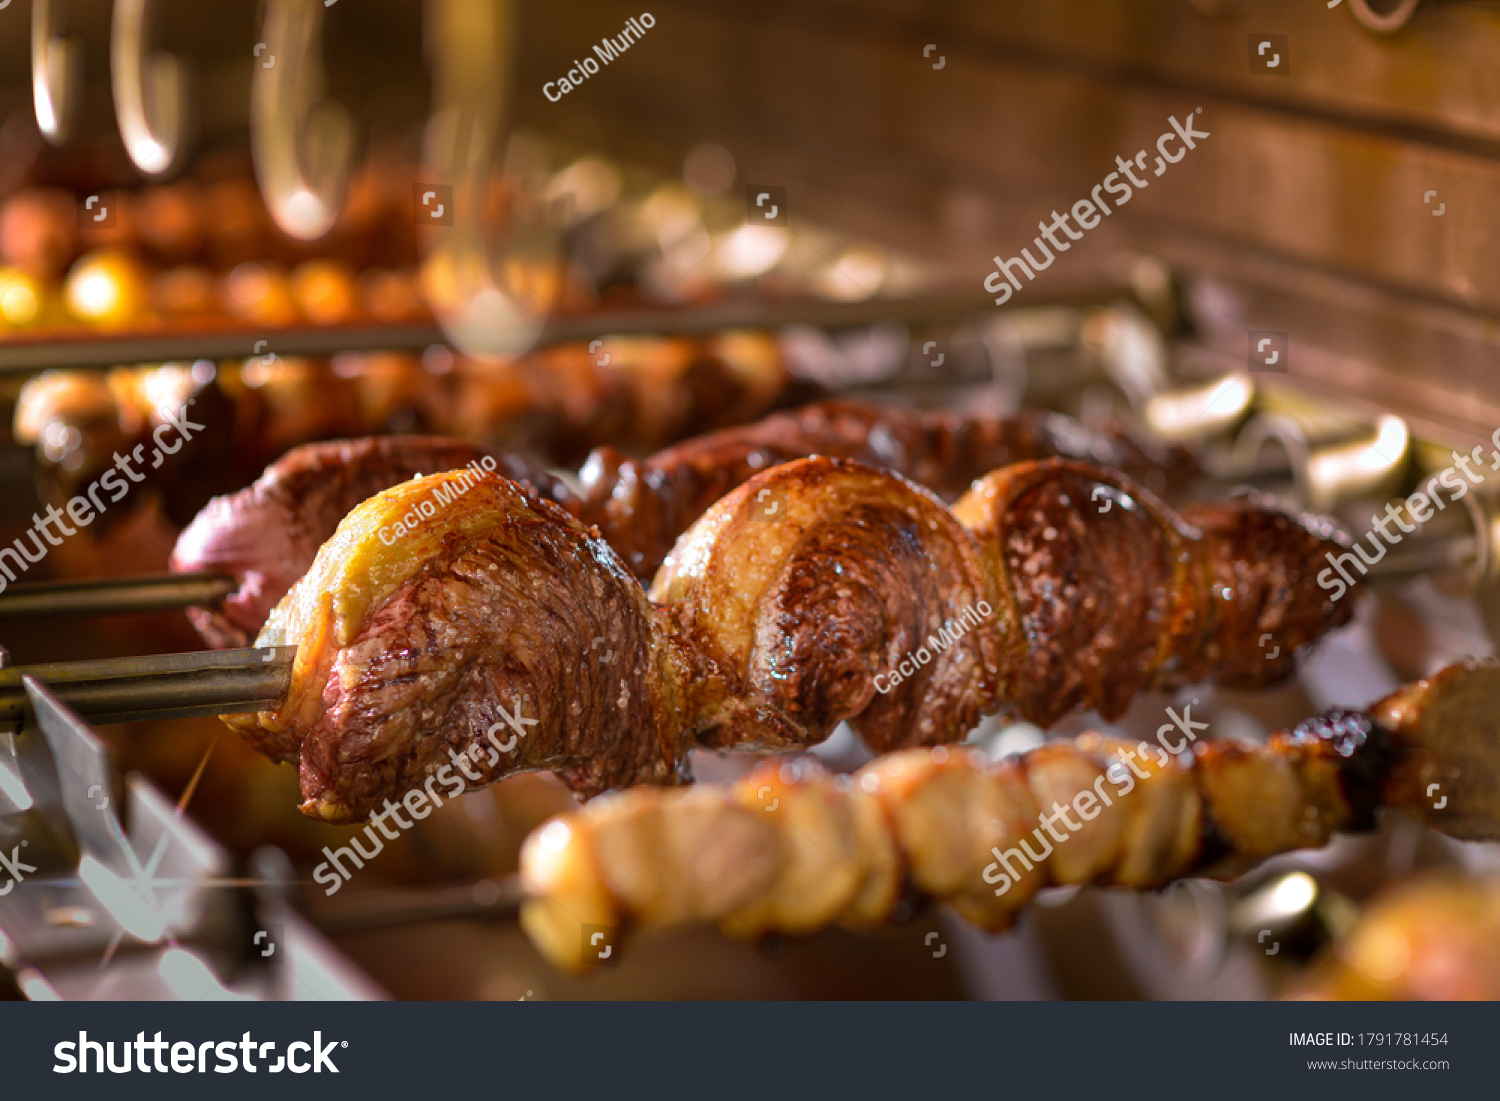 Picanha barbecue roasted over hot coals. This form of barbecue is widely consumed throughout Brazil. #1791781454